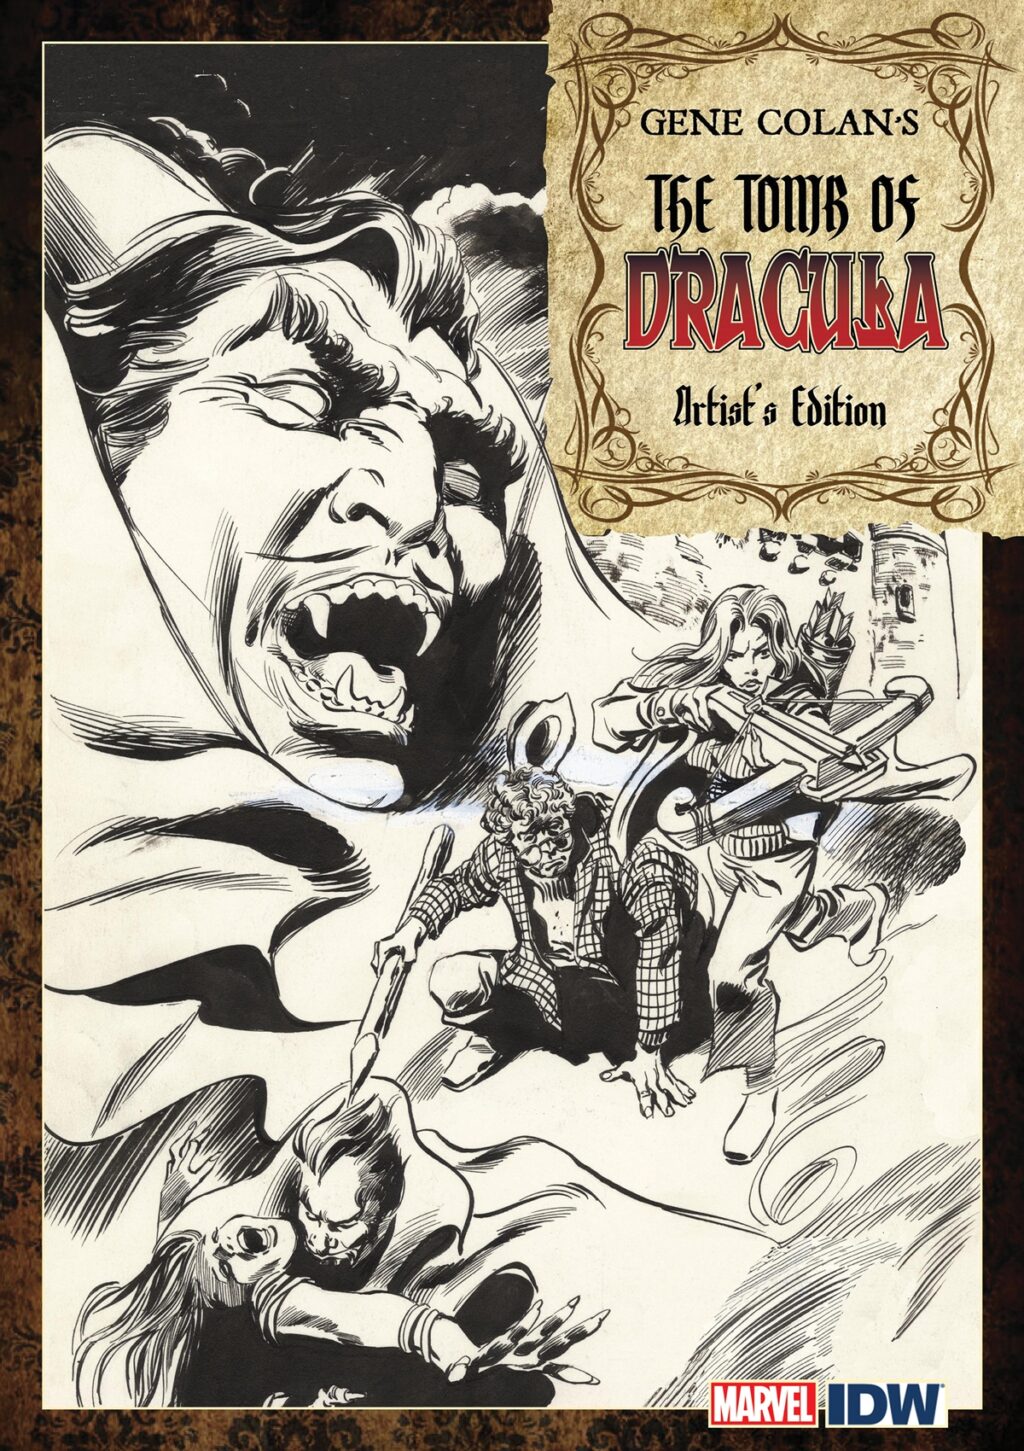 Gene Colan's The Tomb Of Dracula Artist's Edition cover prelim